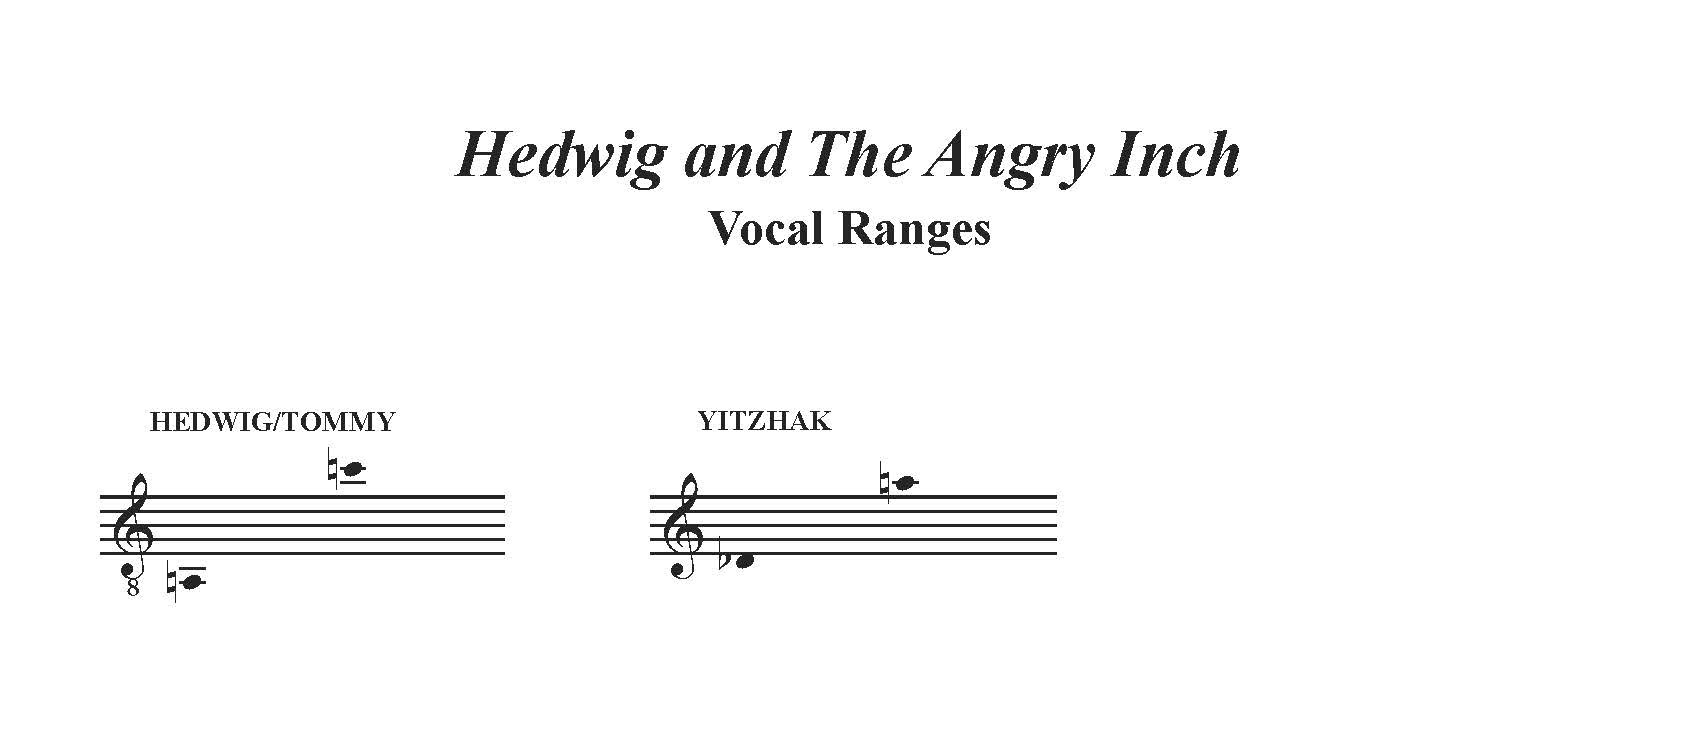 Hedwig and the Angry Inch Vocal Ranges